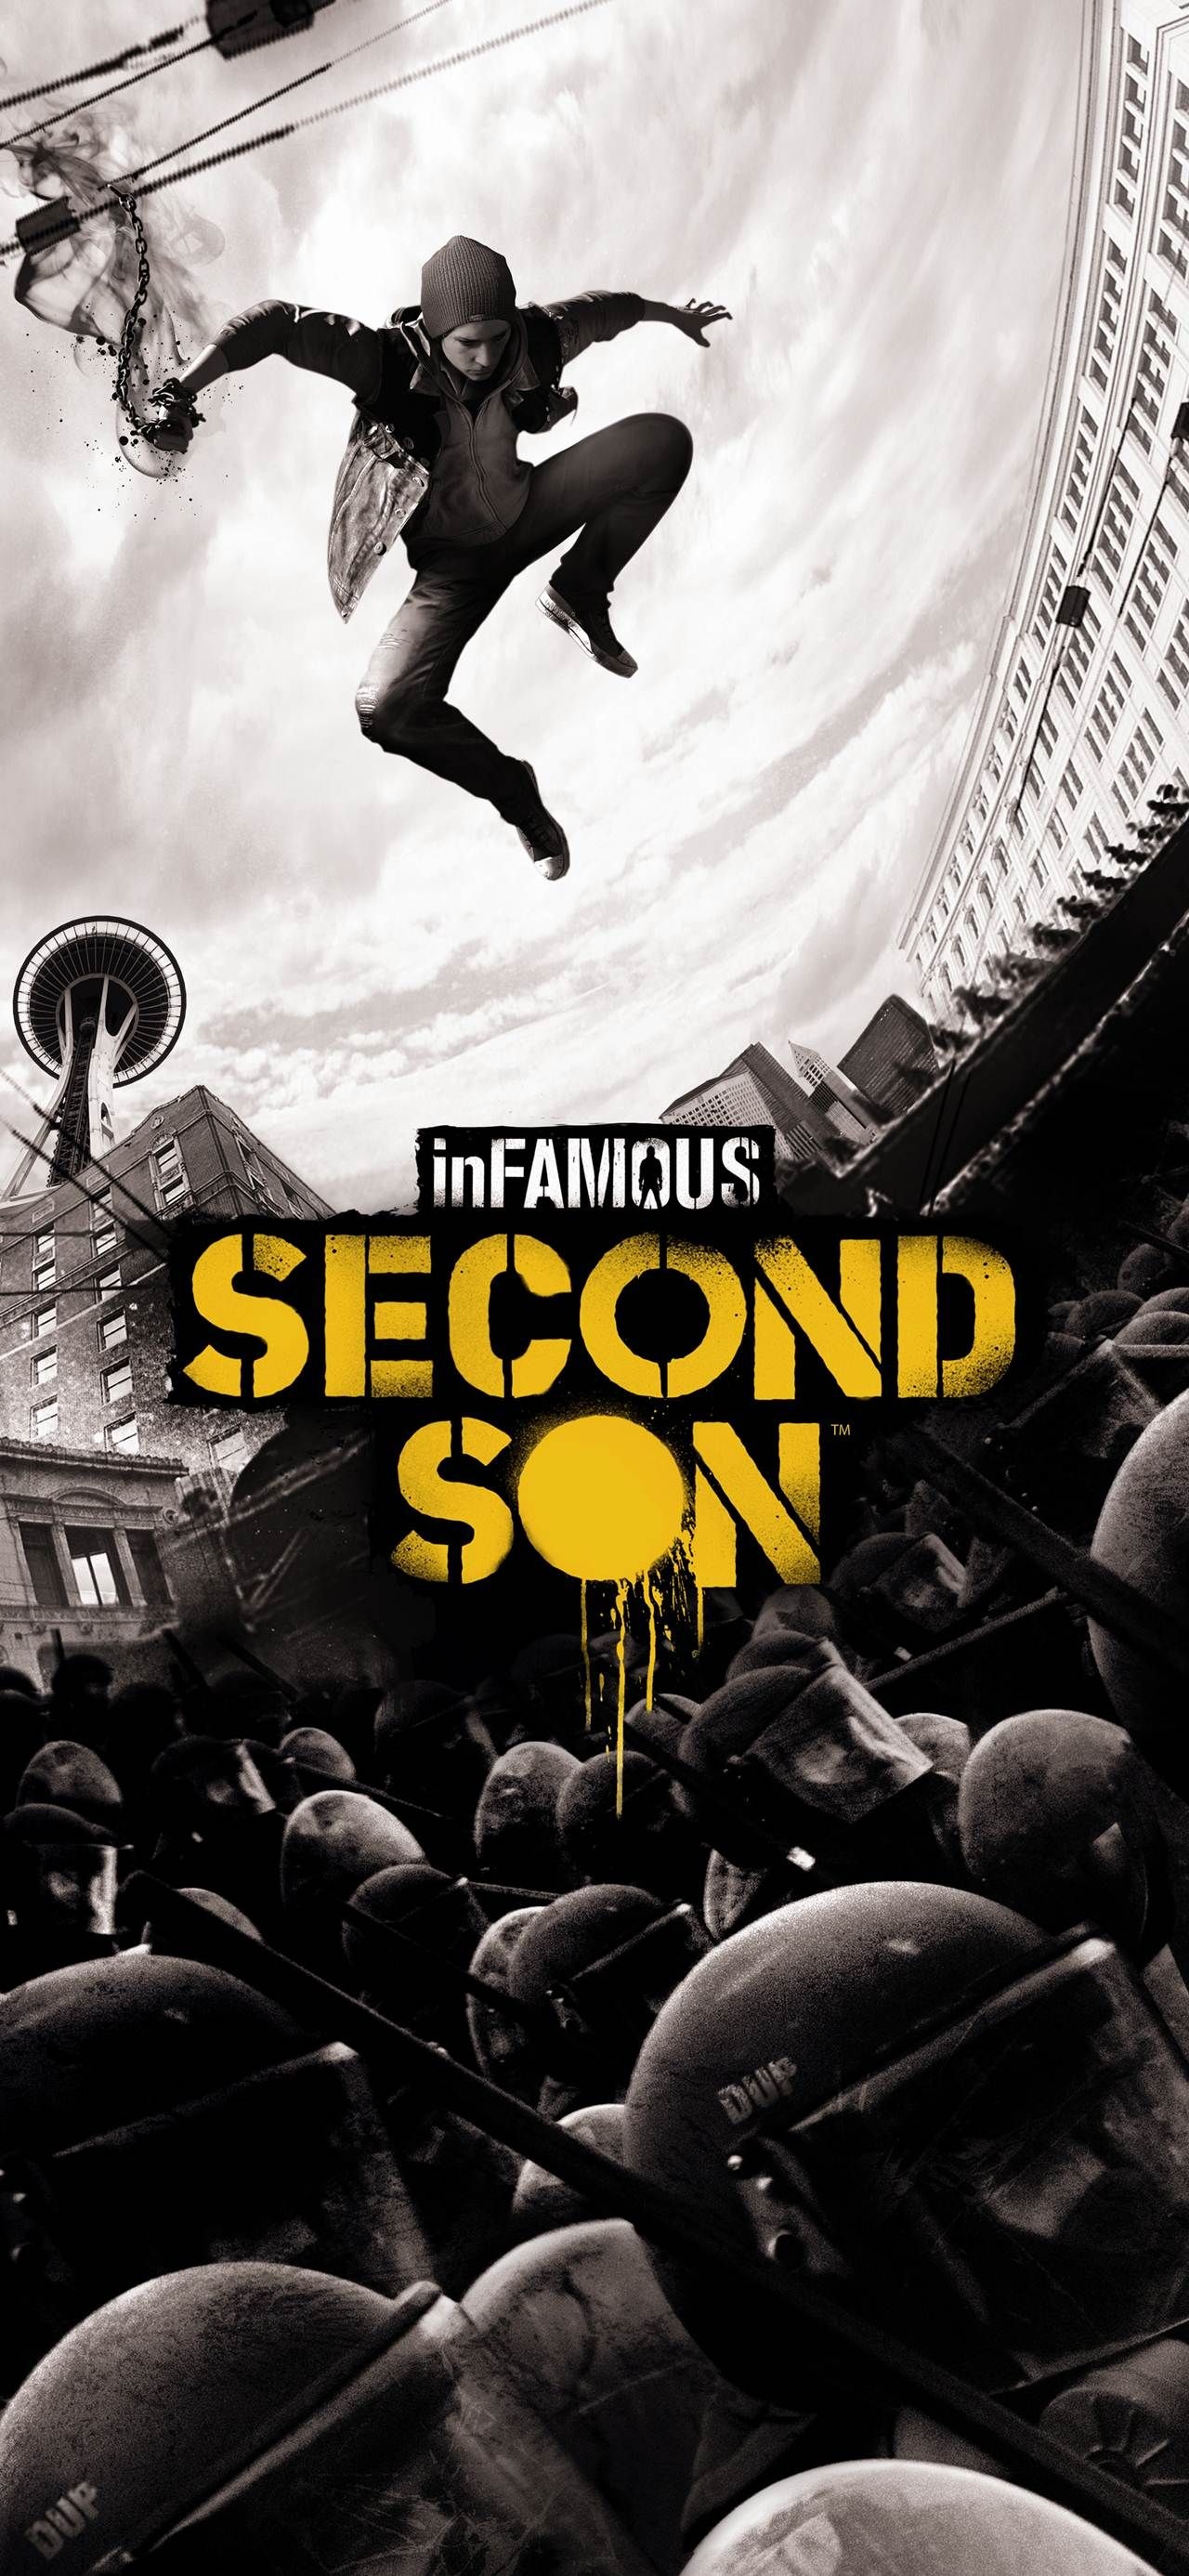 inFAMOUS: Second Son, Funny contests, Offbeat humor, Participate and win, 1280x2780 HD Handy